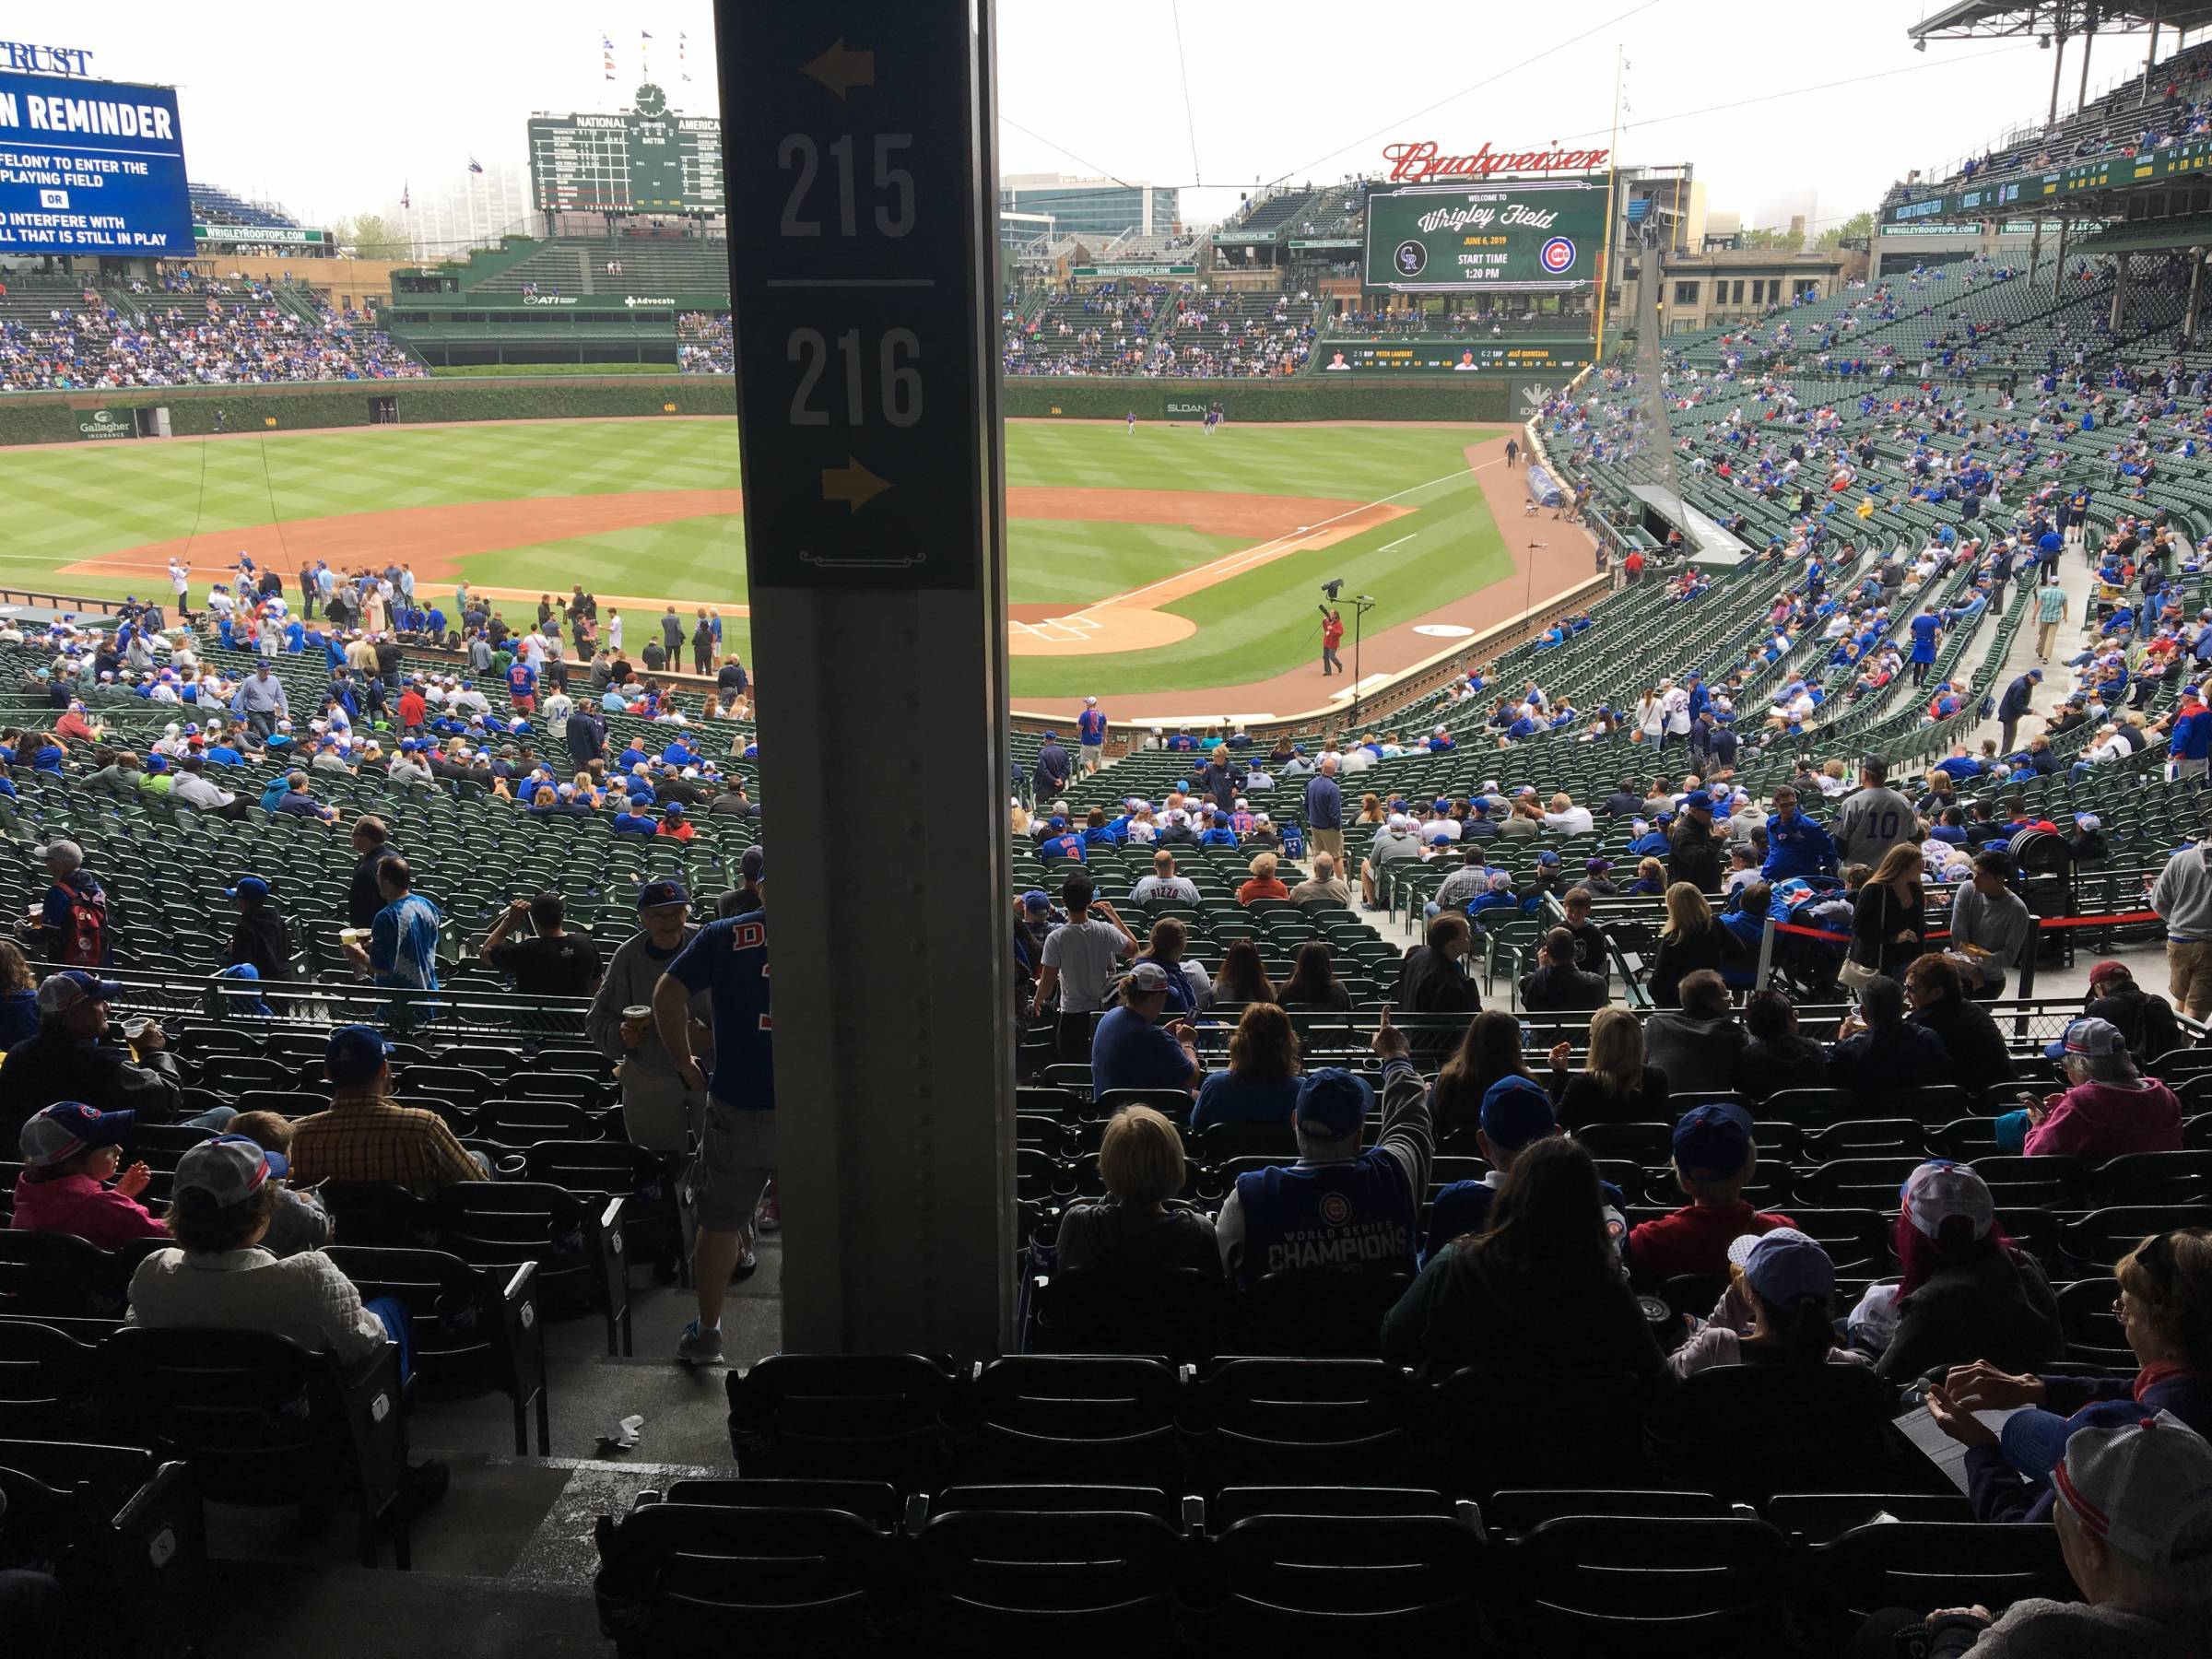 Pole in Section 216 at Wrigley Field